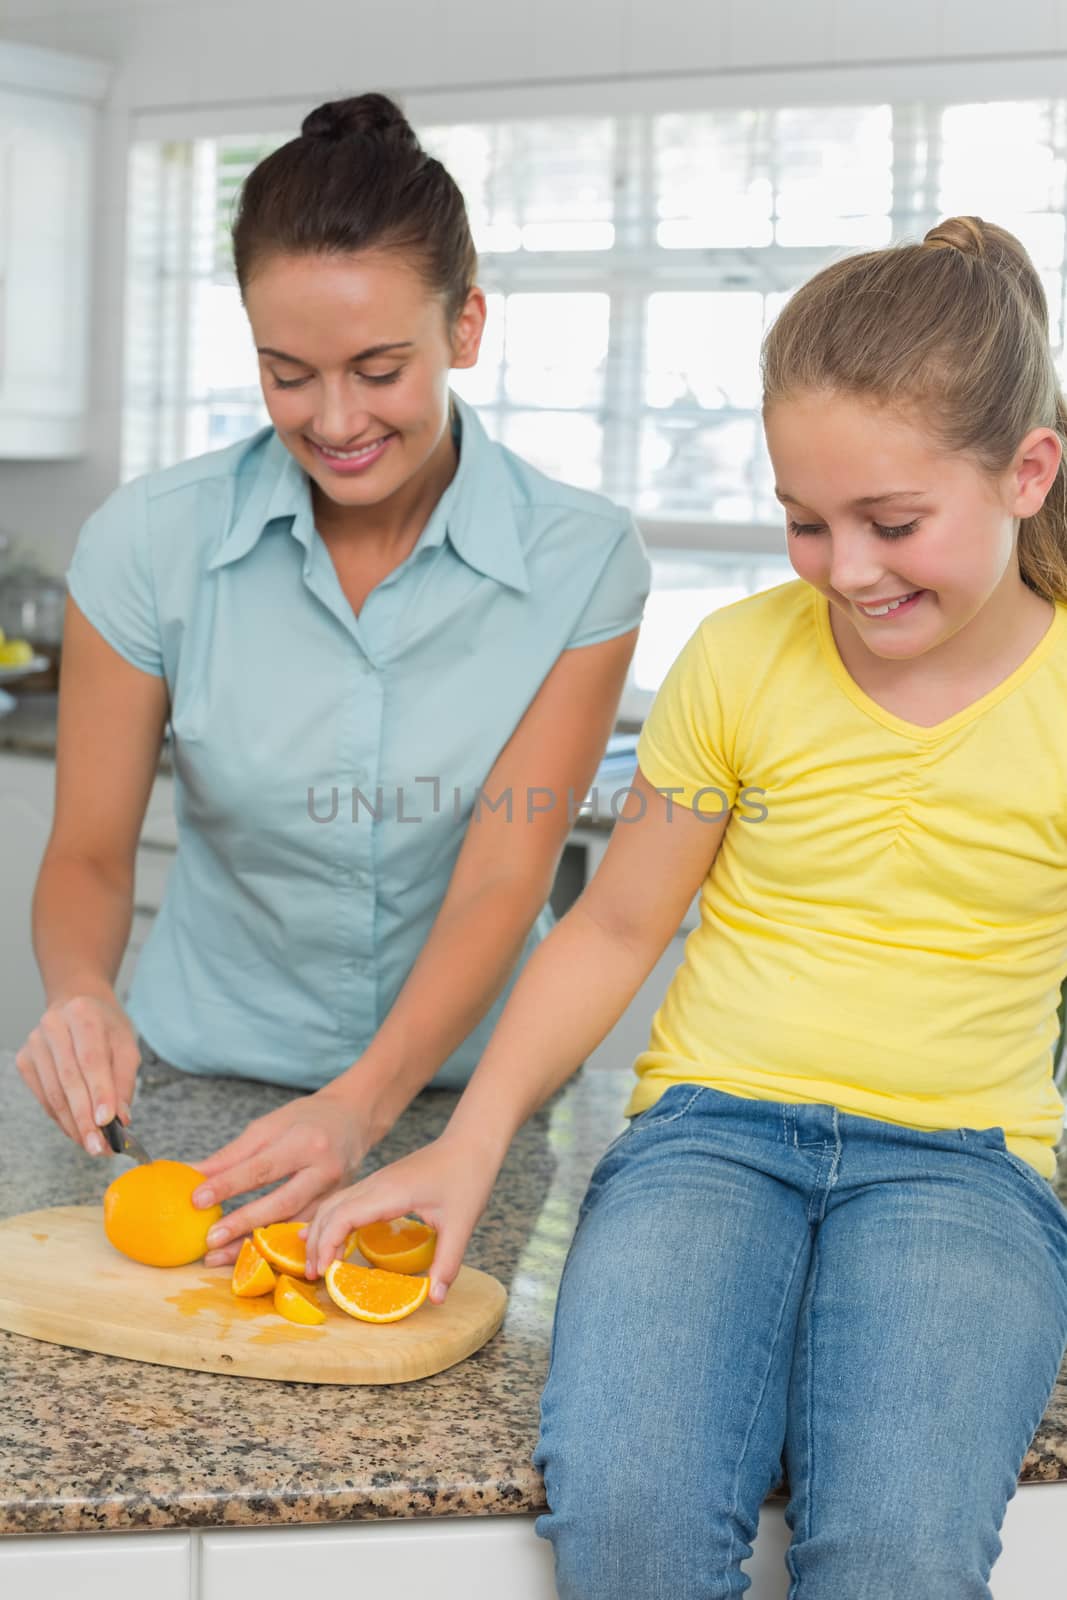 Woman slicing oranges for daughter in kitchen by Wavebreakmedia